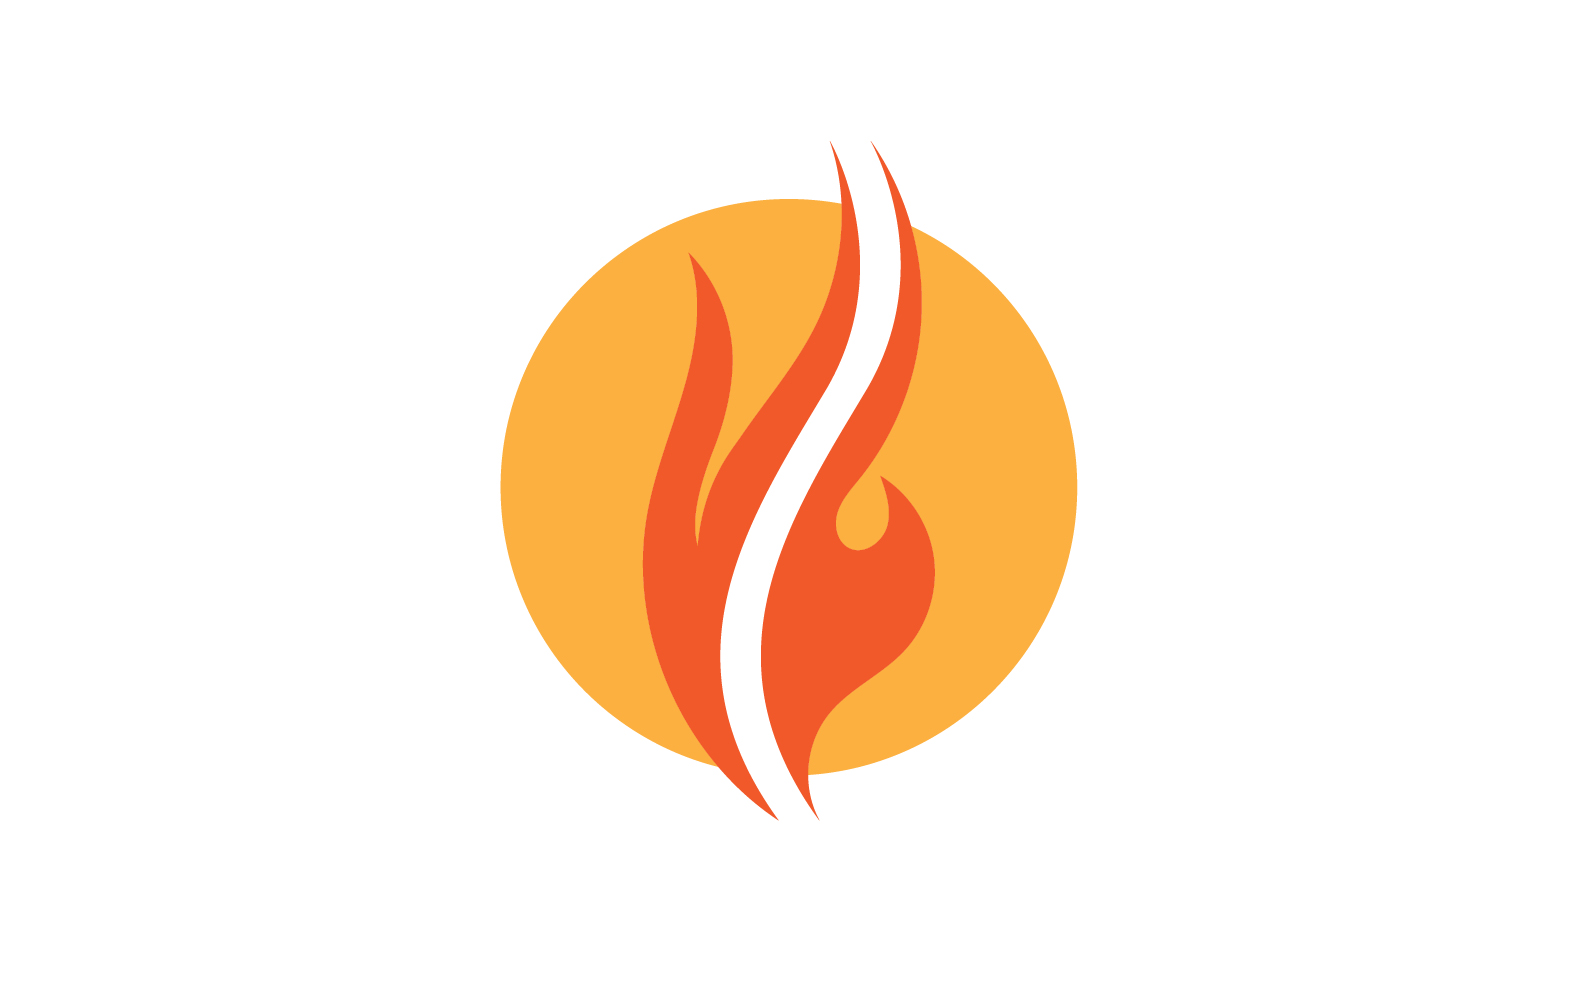 Fire Flame Vector Logo Hot Gas And Energy Symbol V31